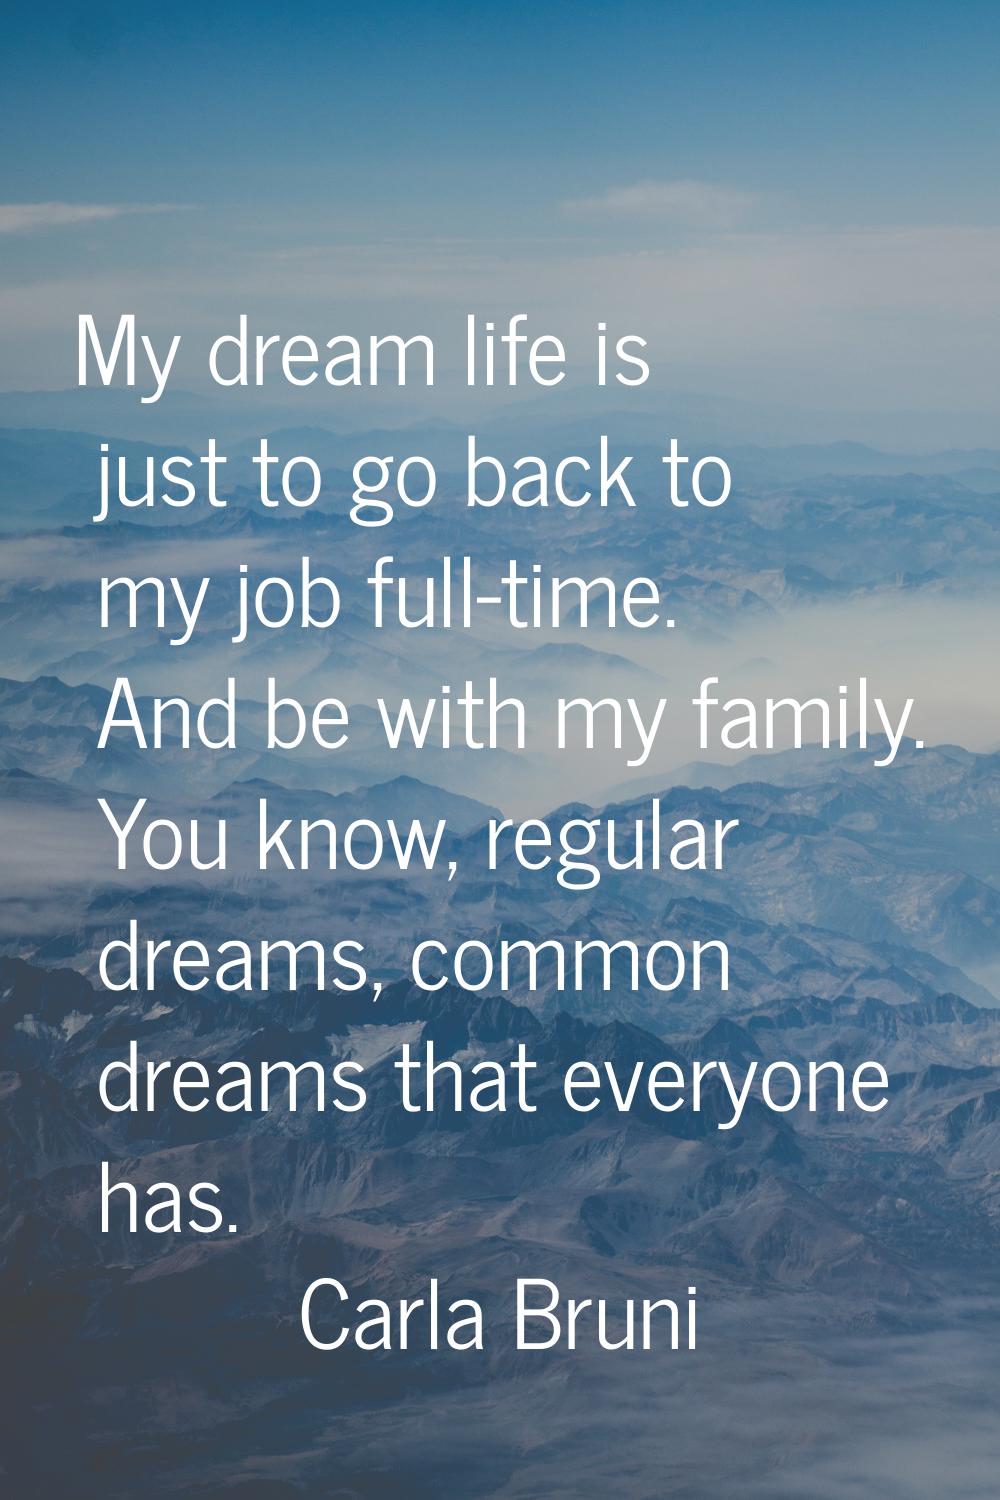 My dream life is just to go back to my job full-time. And be with my family. You know, regular drea